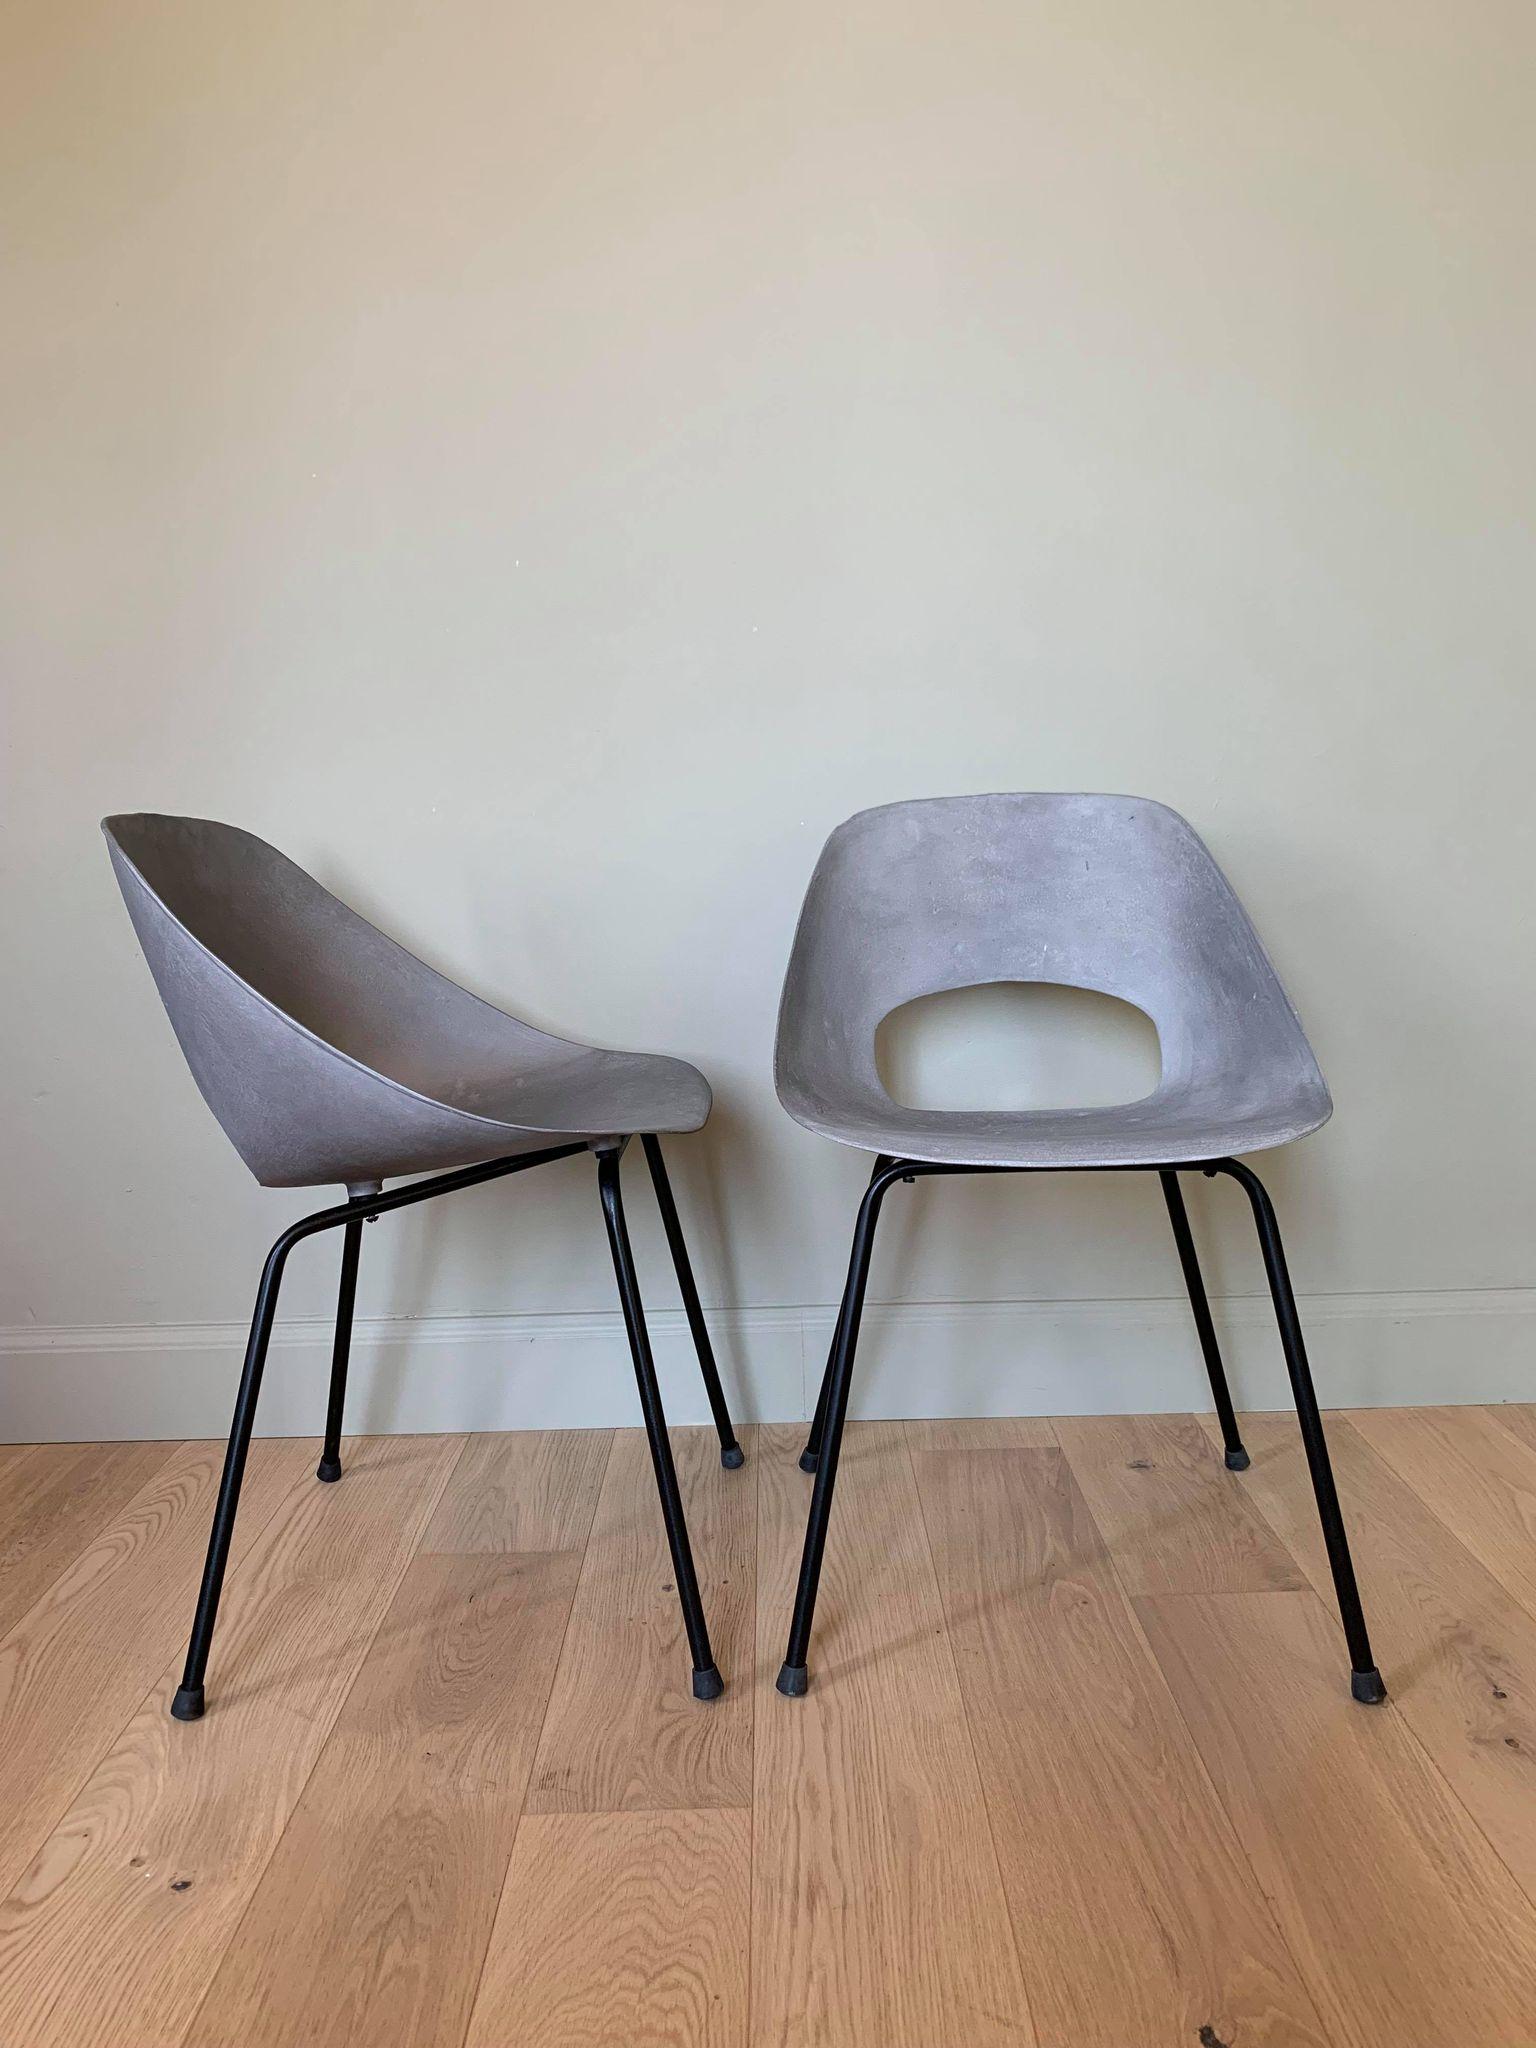 Pair of Mid-Century Aluminium Chairs by Pierre Guariche for Steiner, France 1953 1